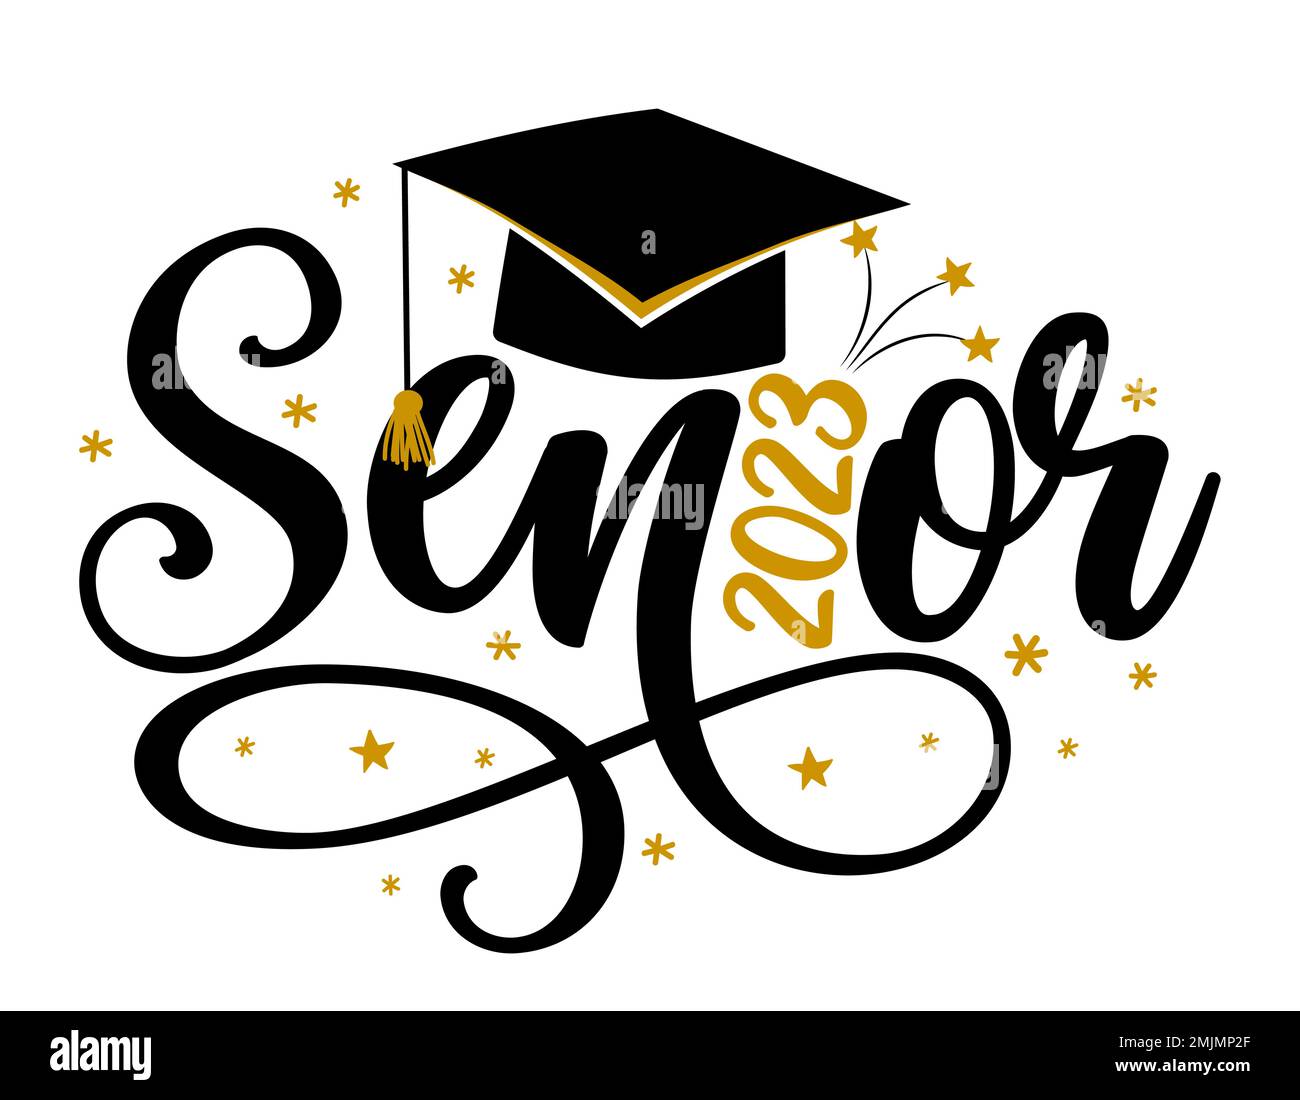 Senior 2023 - Typography. blck text isolated white background. Vector illustration of a graduating class of 2023. graphics elements for t-shirts, and Stock Vector